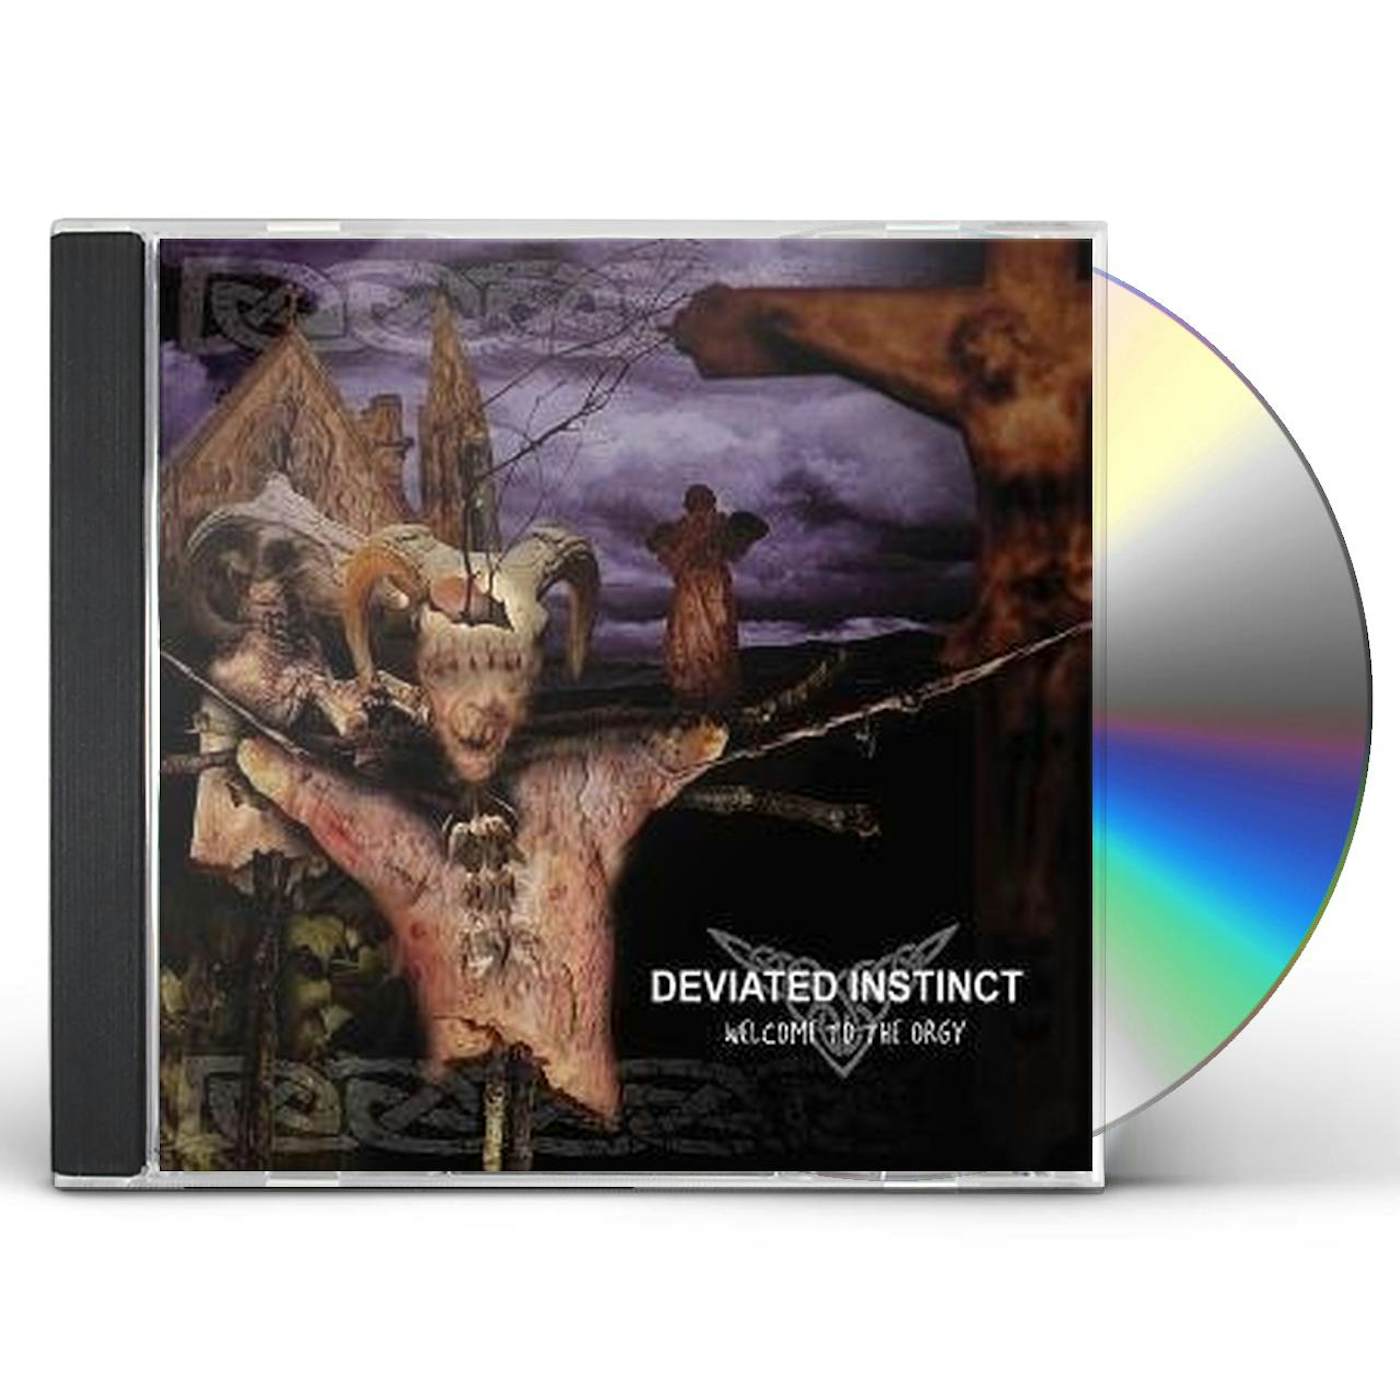 Deviated Instinct WELCOME TO THE ORGY CD